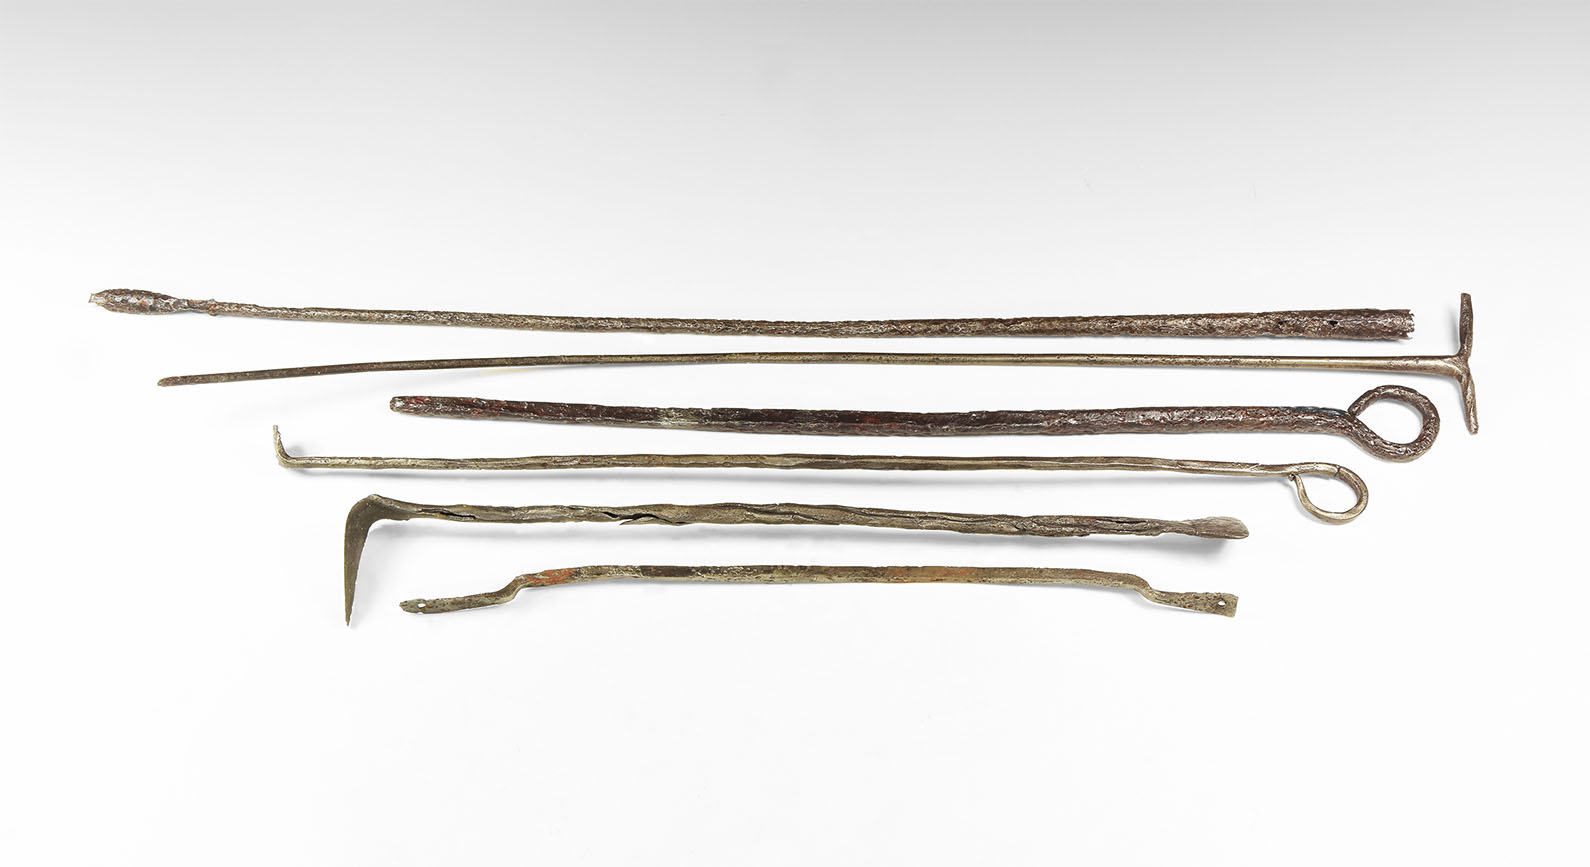 Medieval Implement Group